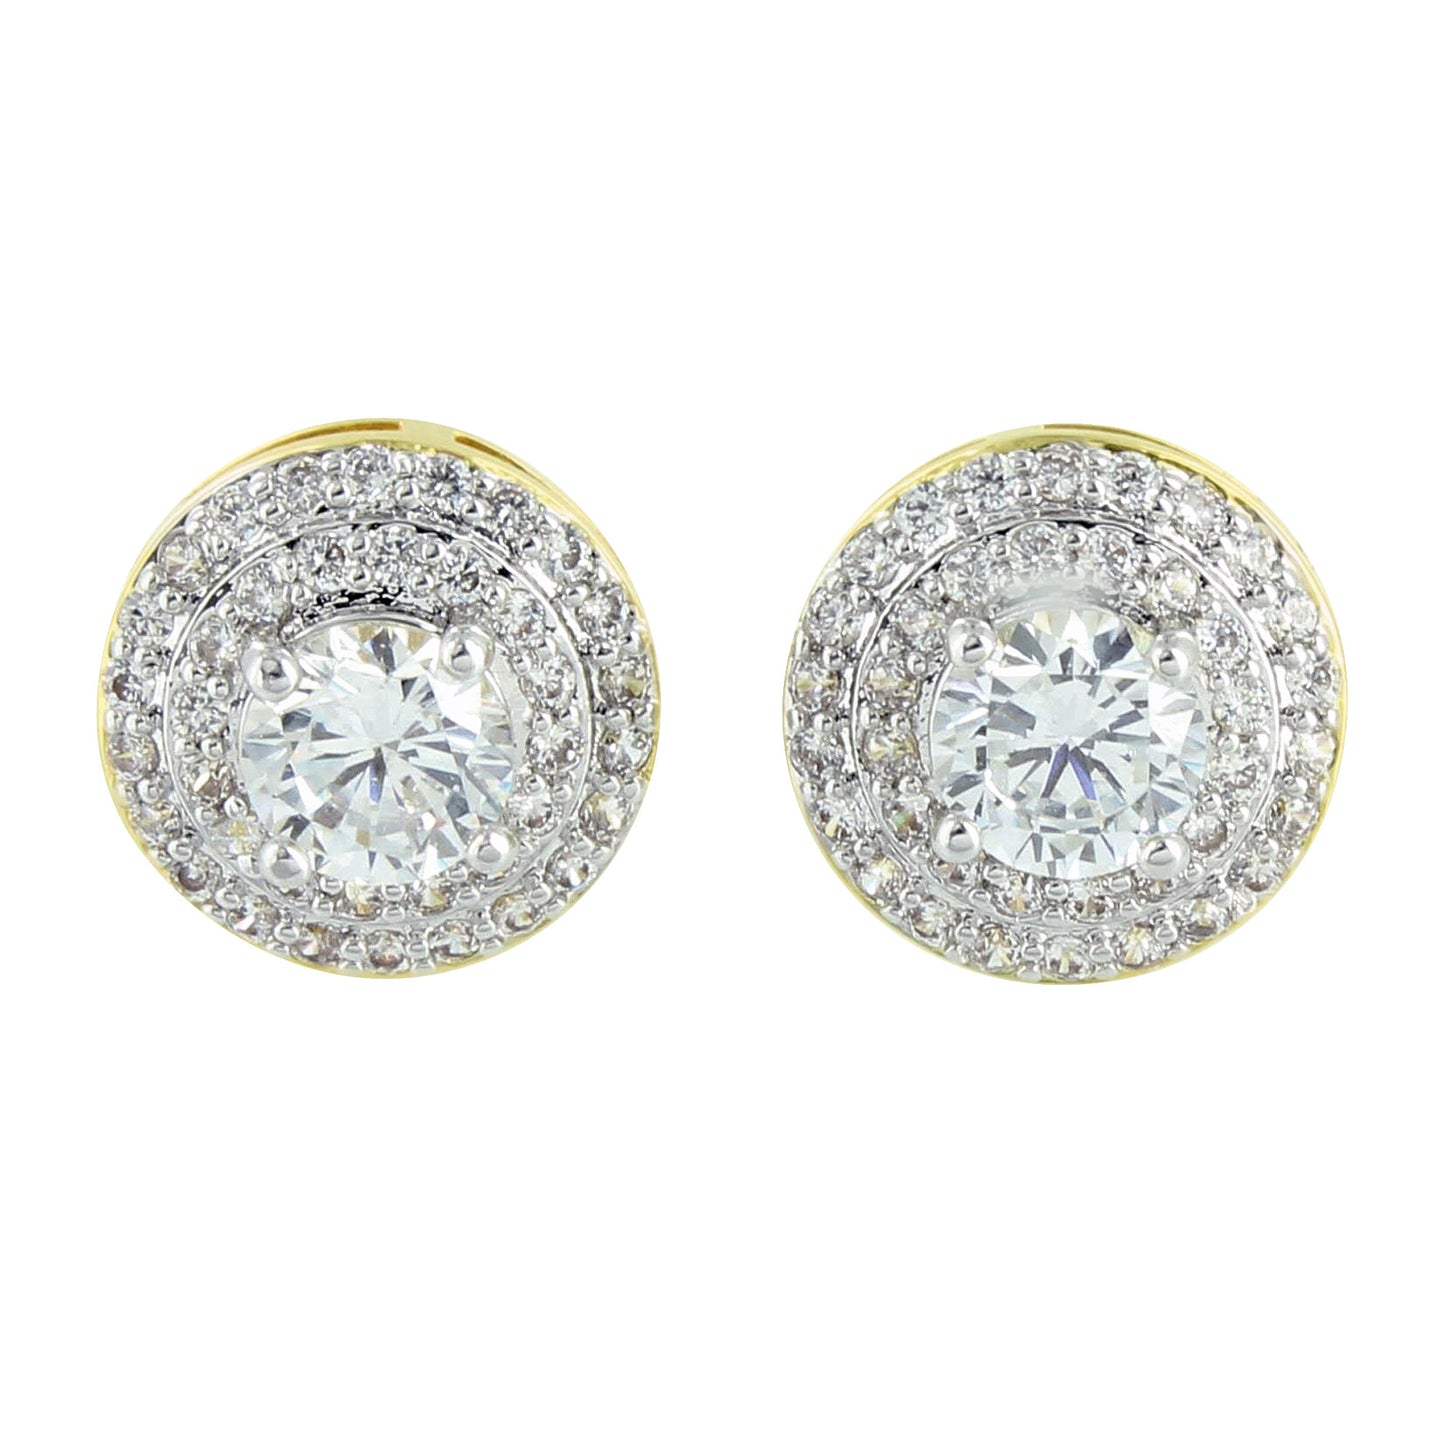 Round Gold Solitaire Earrings 14K Finish Screw Back Pave Mens Womens